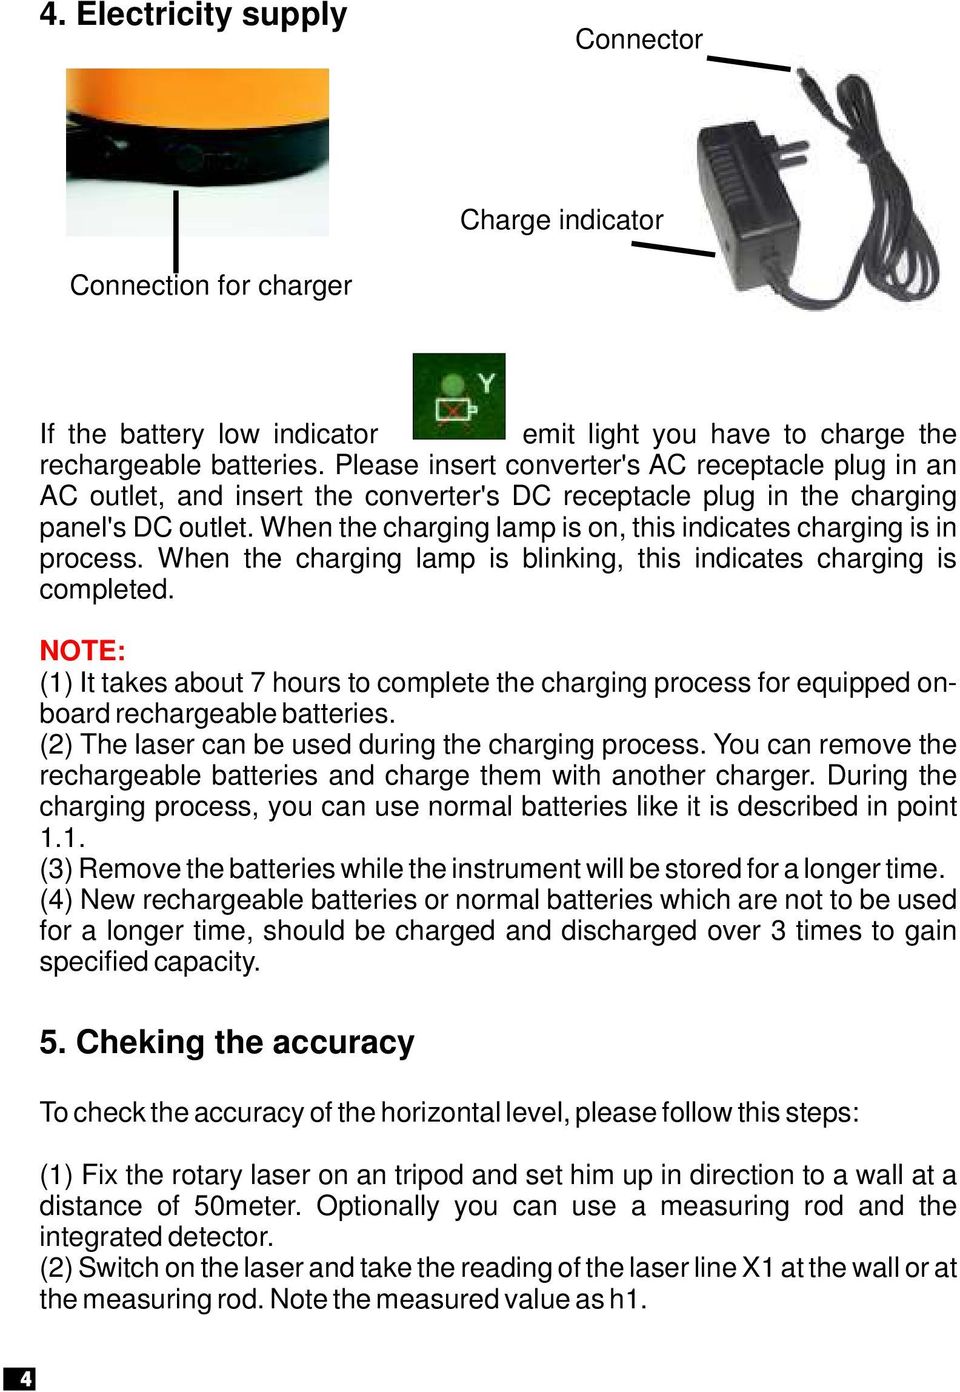 When the charging lamp is on, this indicates charging is in process. When the charging lamp is blinking, this indicates charging is completed.